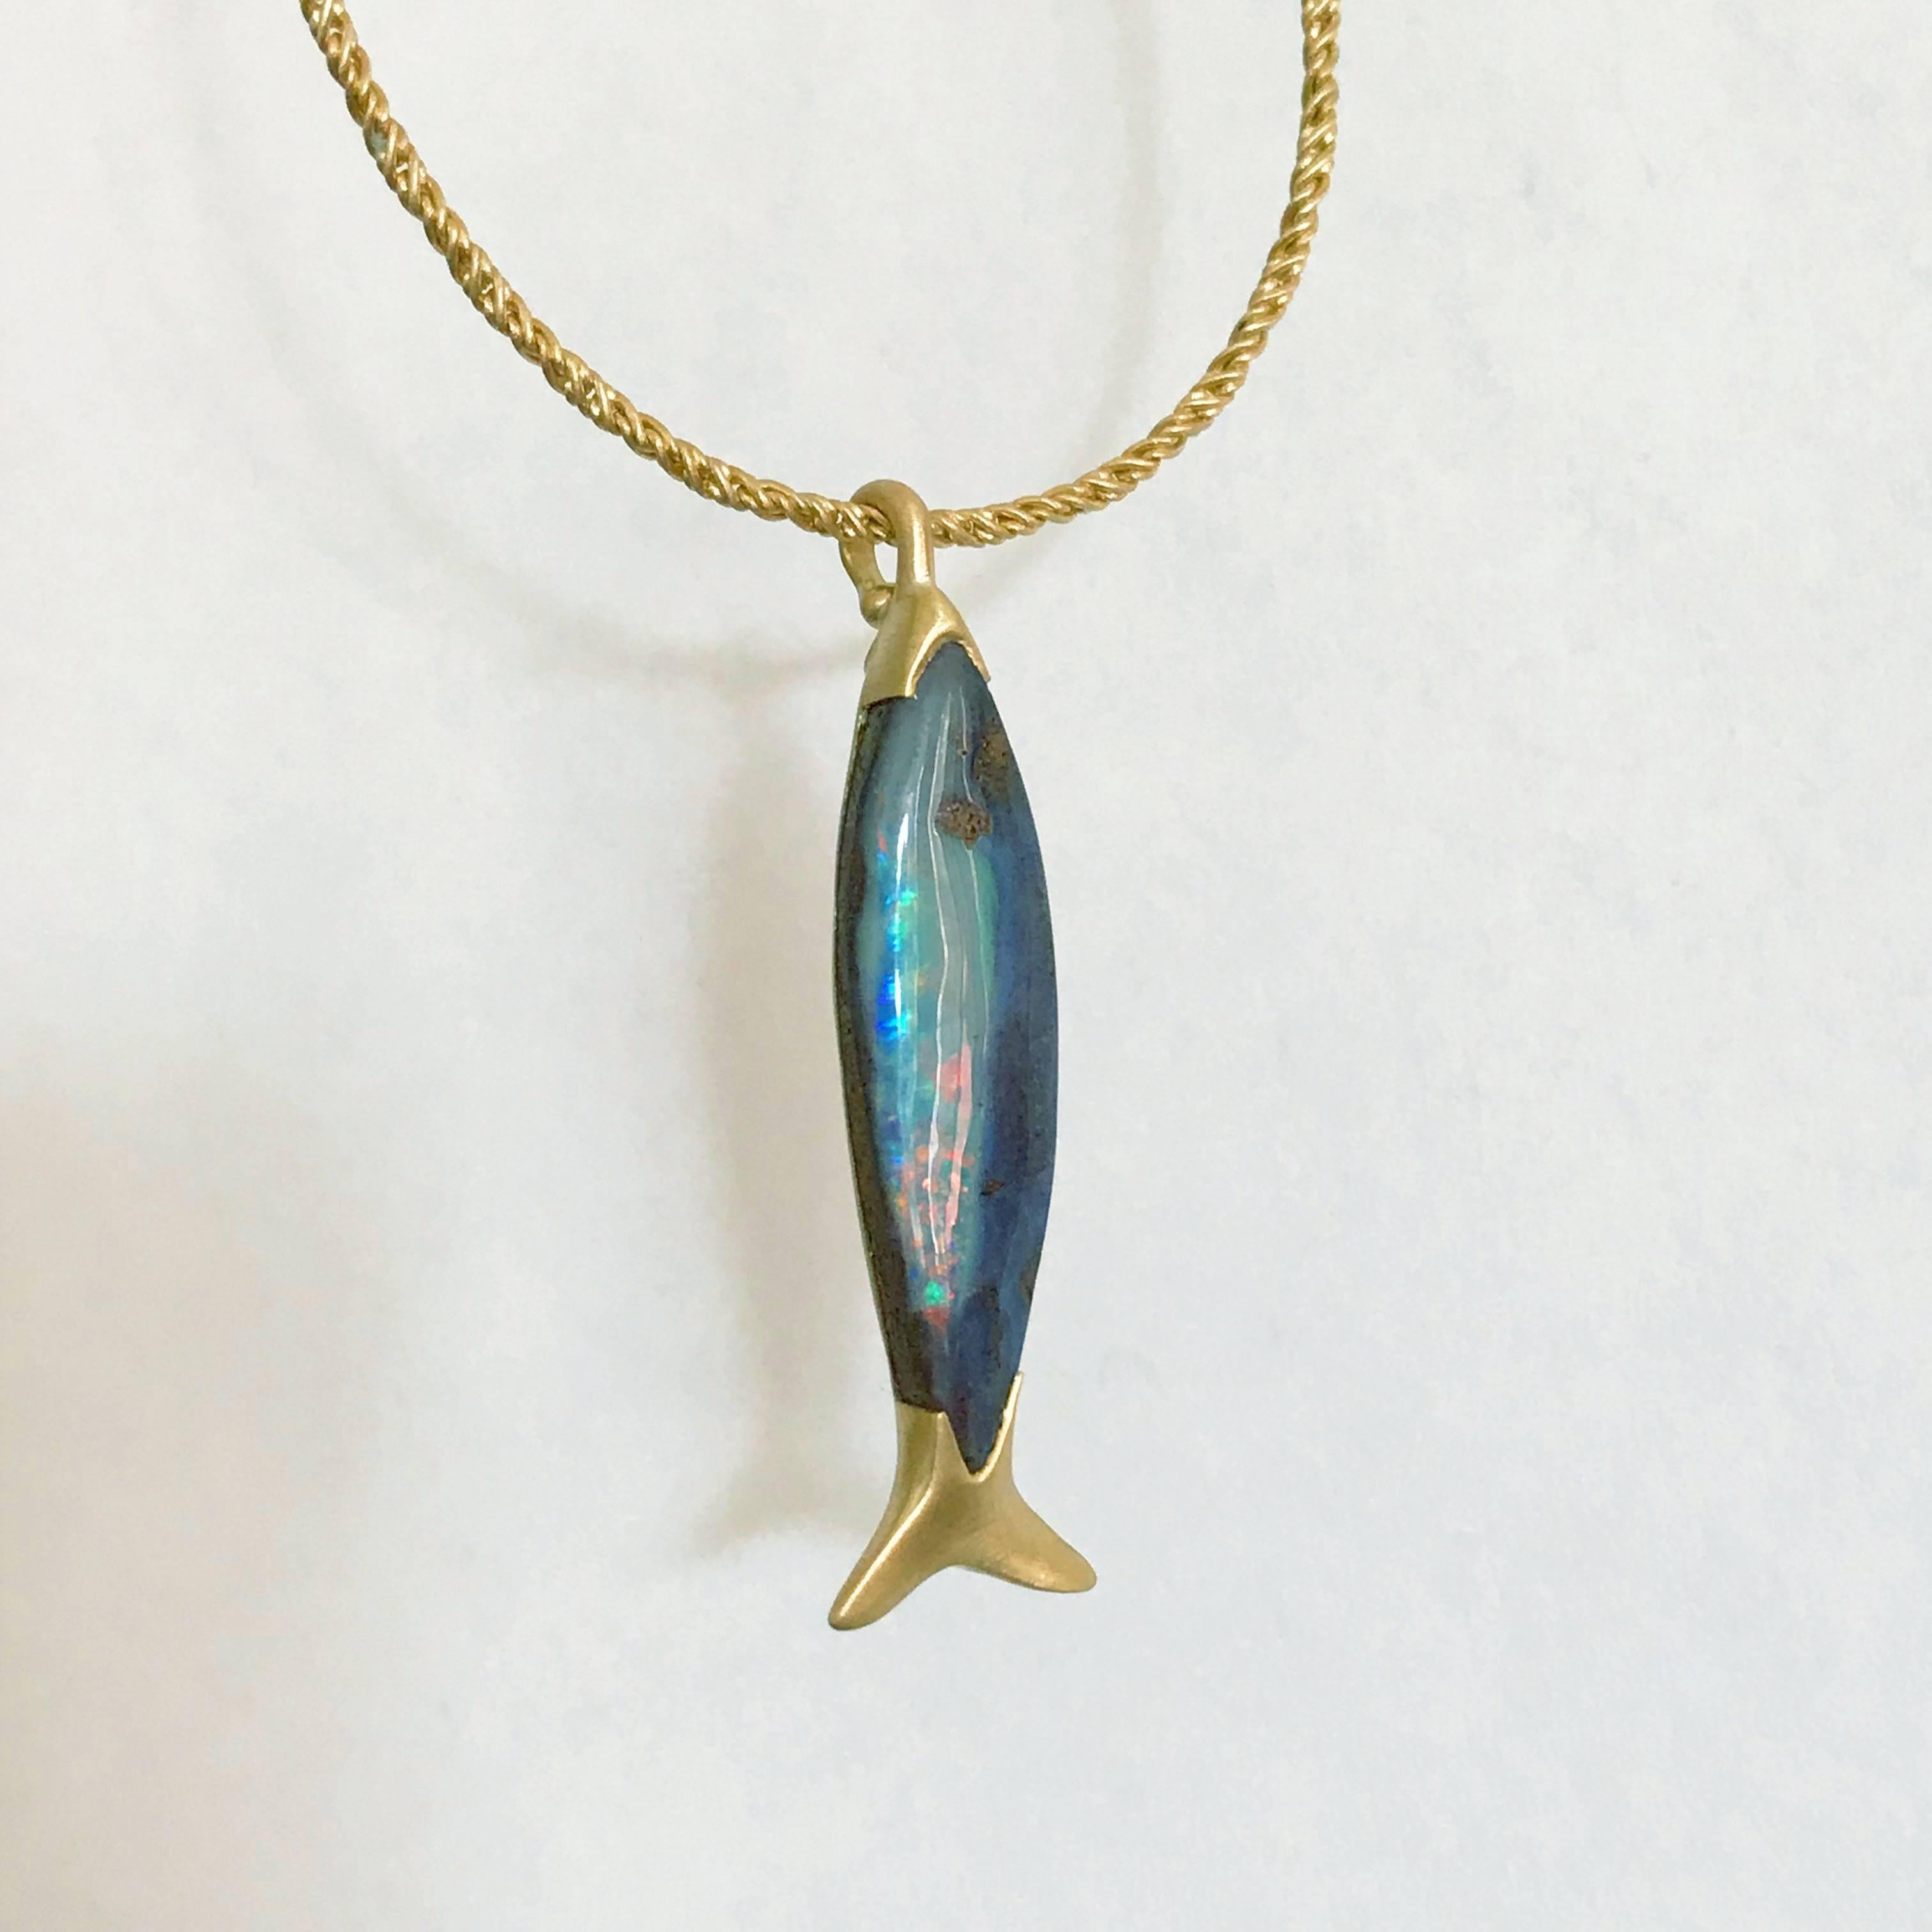 Dalben design 4,3 carat fish shape Australian Boulder Opal with a 18 kt cord style yellow gold pendant necklace.
The Australian Boulder Opal have a lovely fish shape witha little brown eye and multicolor spots on the belly.
It really looks like a